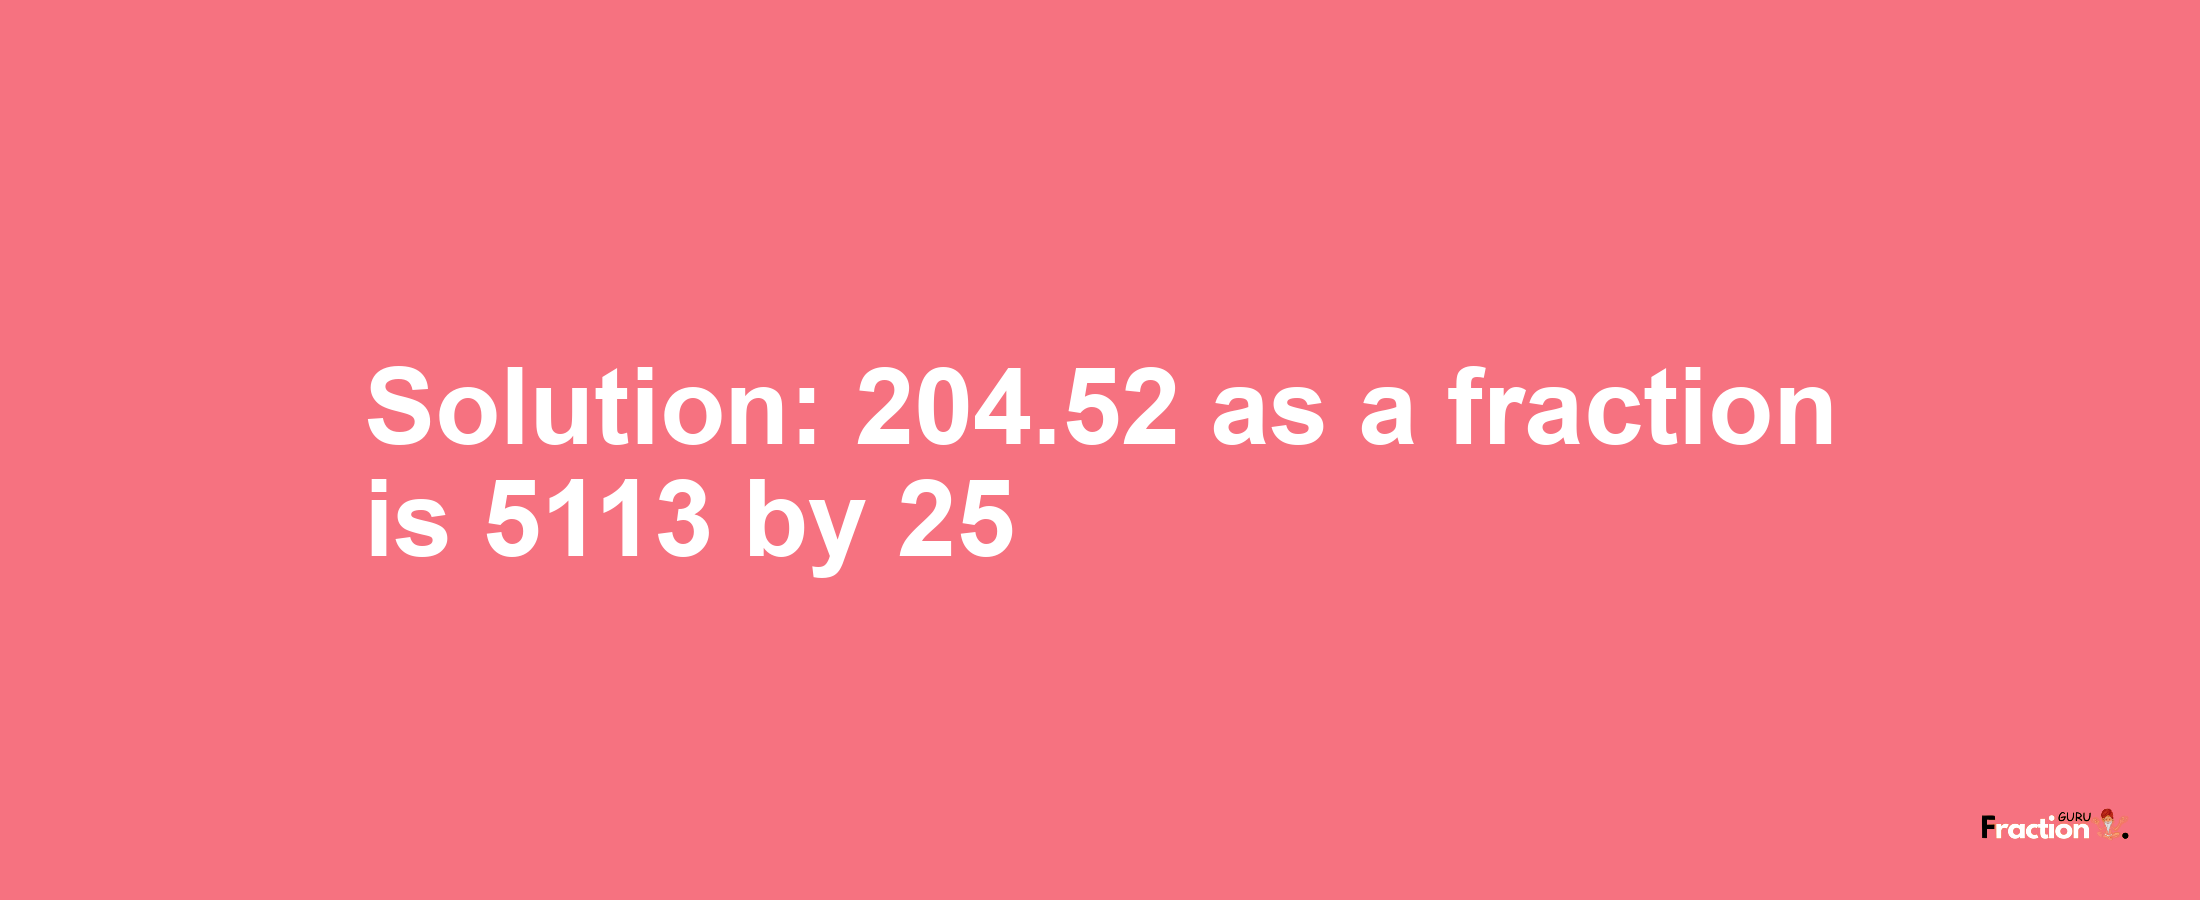 Solution:204.52 as a fraction is 5113/25